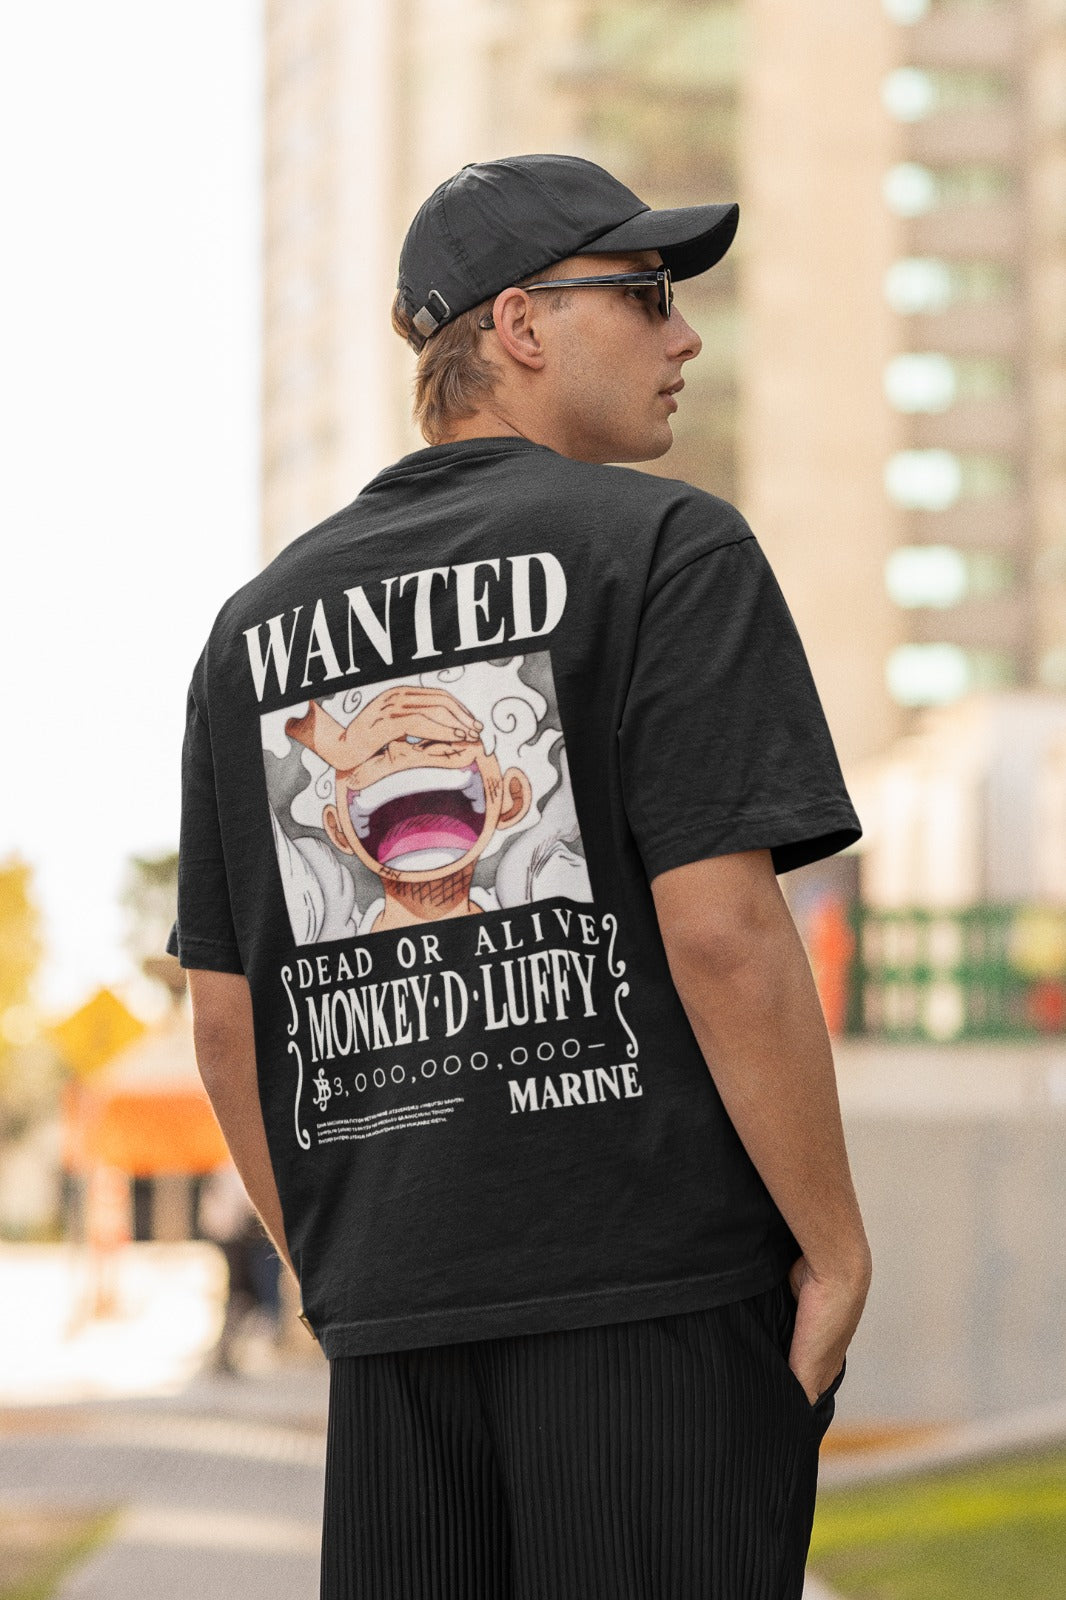 Step into the world of One Piece fashion with our black unisex oversized t-shirt featuring Luffy's latest wanted poster in Gear 5 form. Displaying a jaw-dropping bounty of 3 billion berries on the back, this captivating tee is a must-have for anime enthusiasts. Crafted for comfort and style, it's perfect for anime conventions or casual outings. Embrace the adventure and grab yours now!